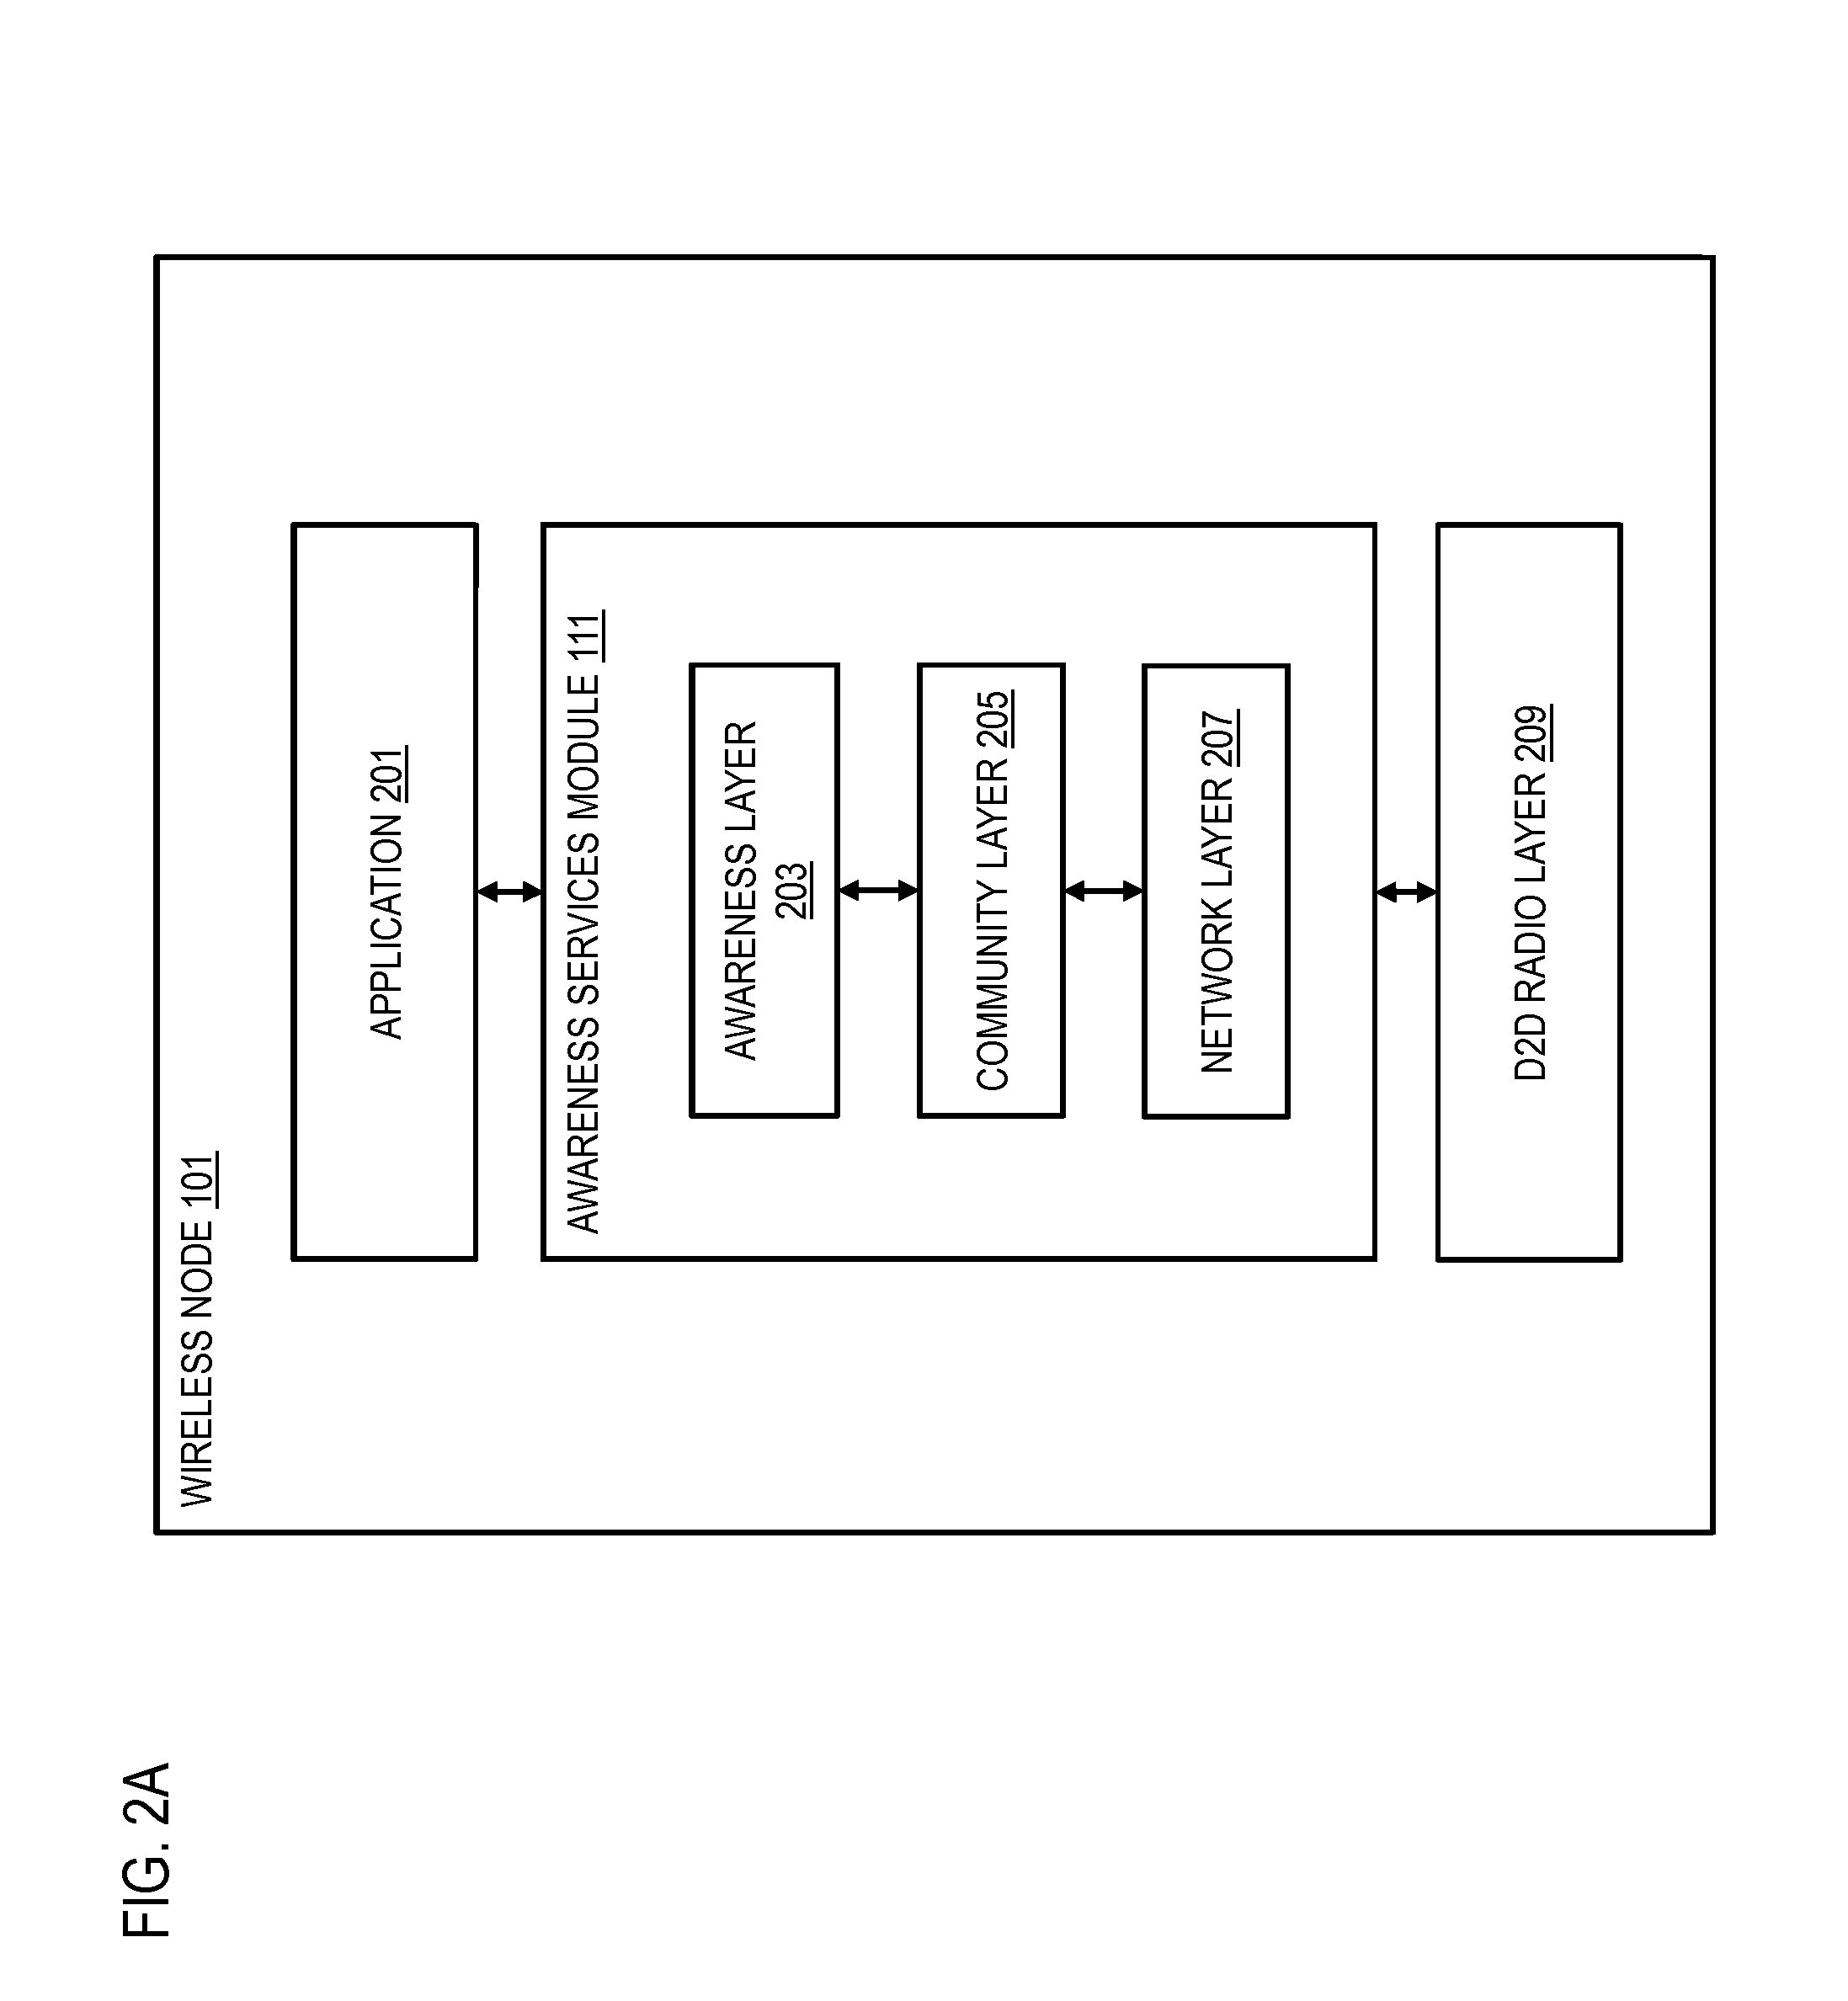 Method and apparatus for coordinating information request messages over an ad-hoc mesh network